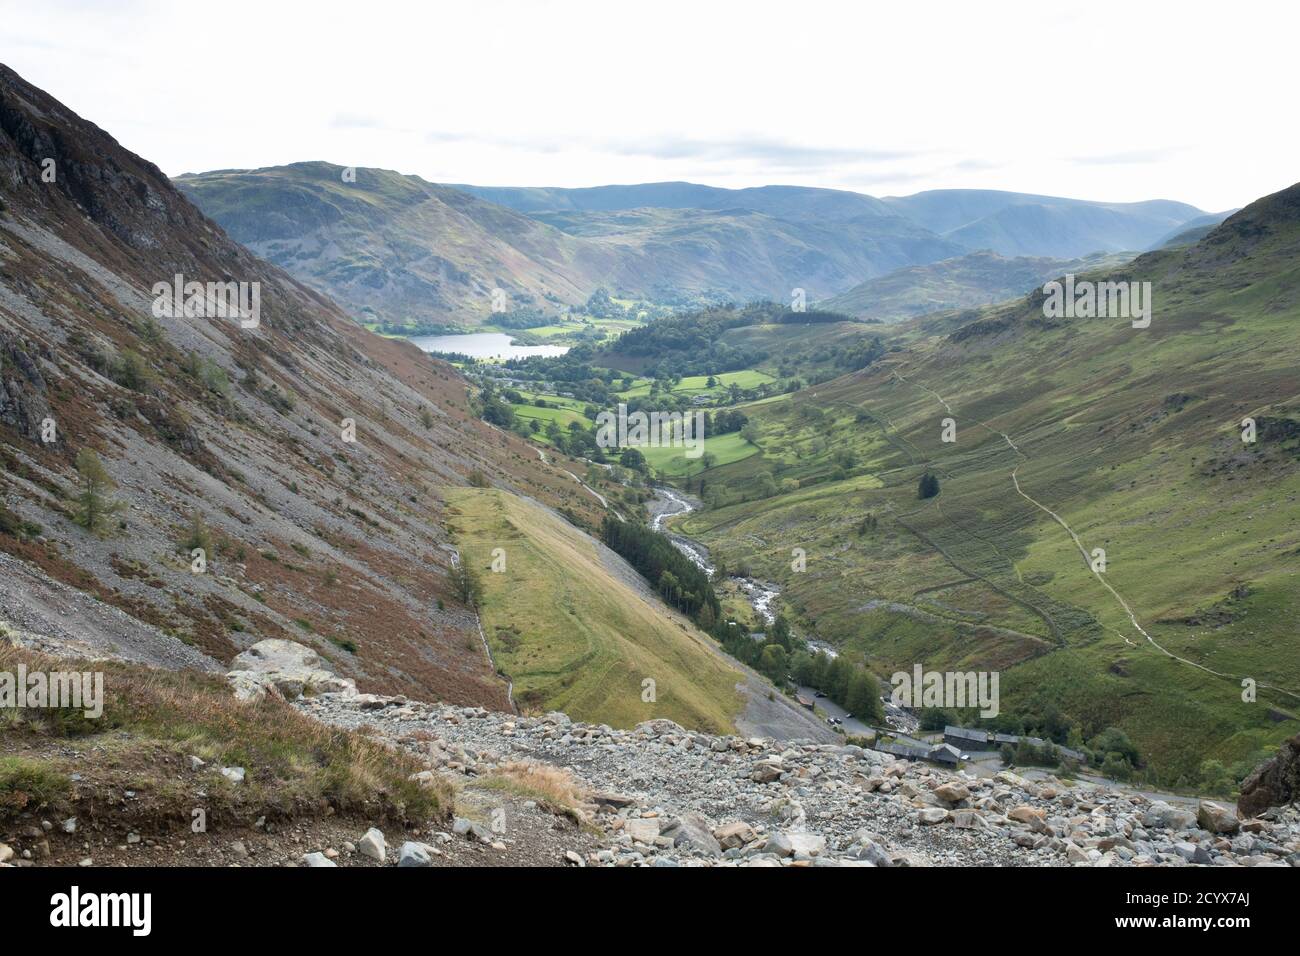 Glenridding Beck and Ullswater from Stang End above the disused mine workings on Greenside Road track near Glenridding in the Lake District, UK Stock Photo